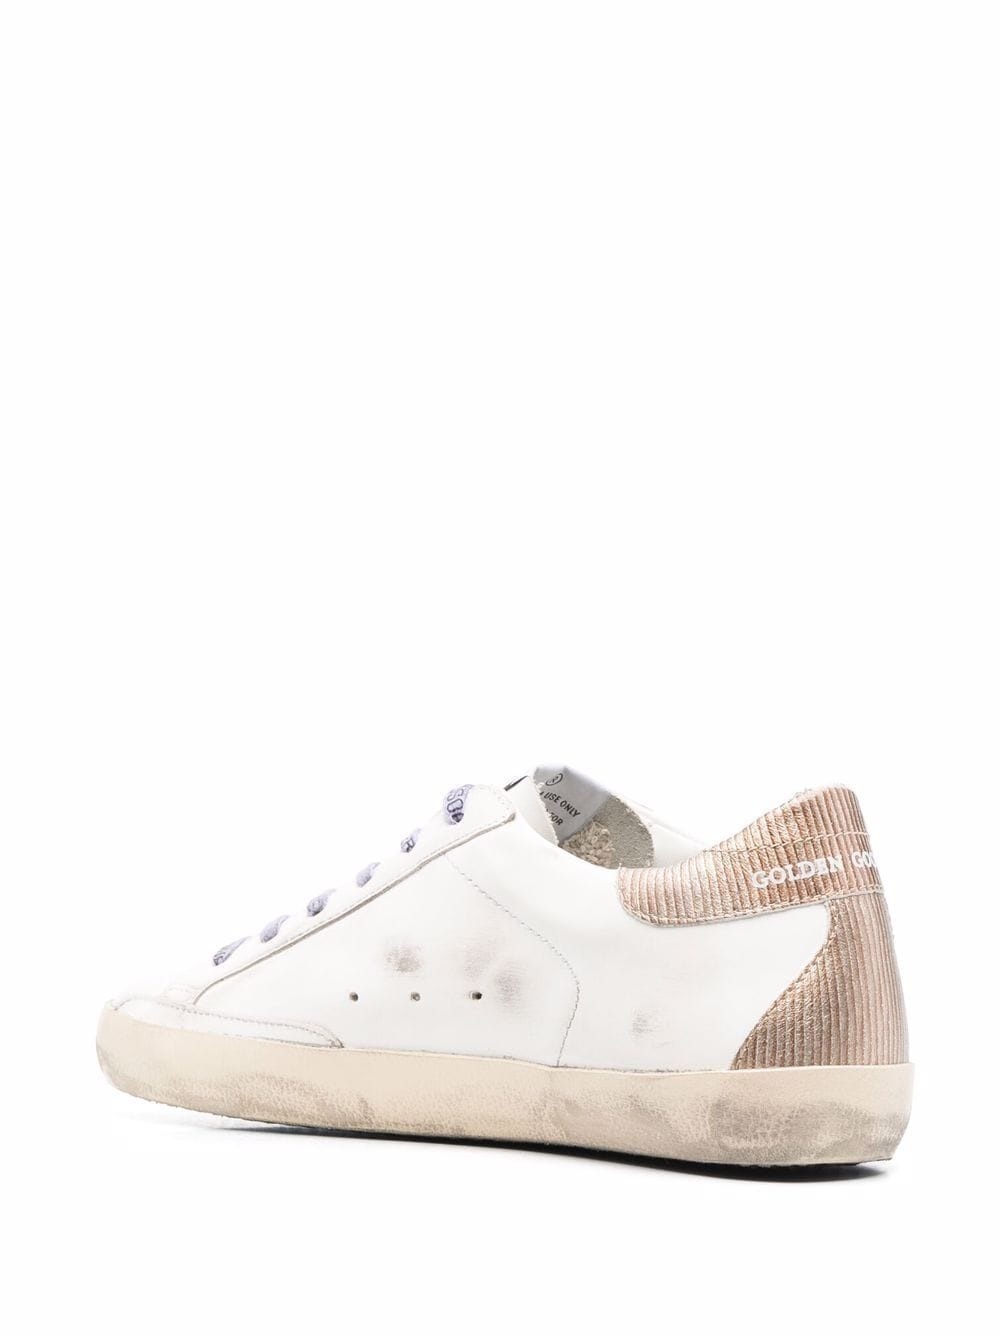 Golden Goose Deluxe Brand Shoes White Woman - 6